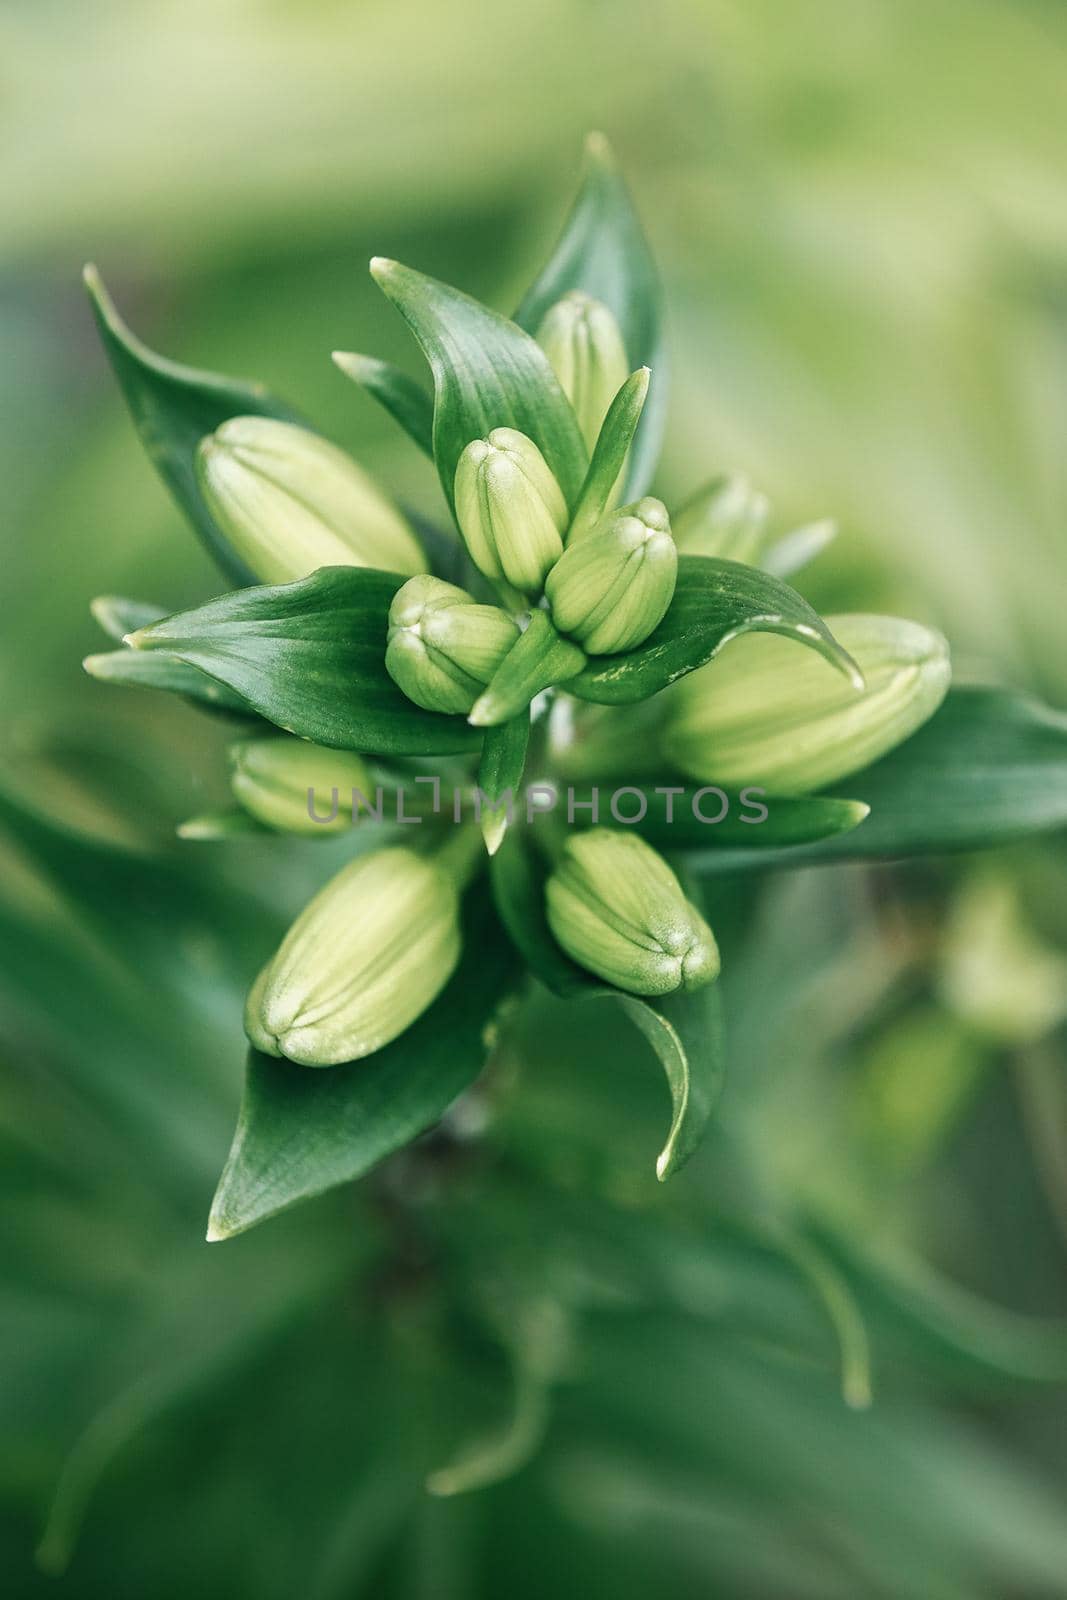 Lilium flowers before bloom, asiatic hybrids ornamental cultivated, flowering lilies, green bouquet in, buds. by Lincikas